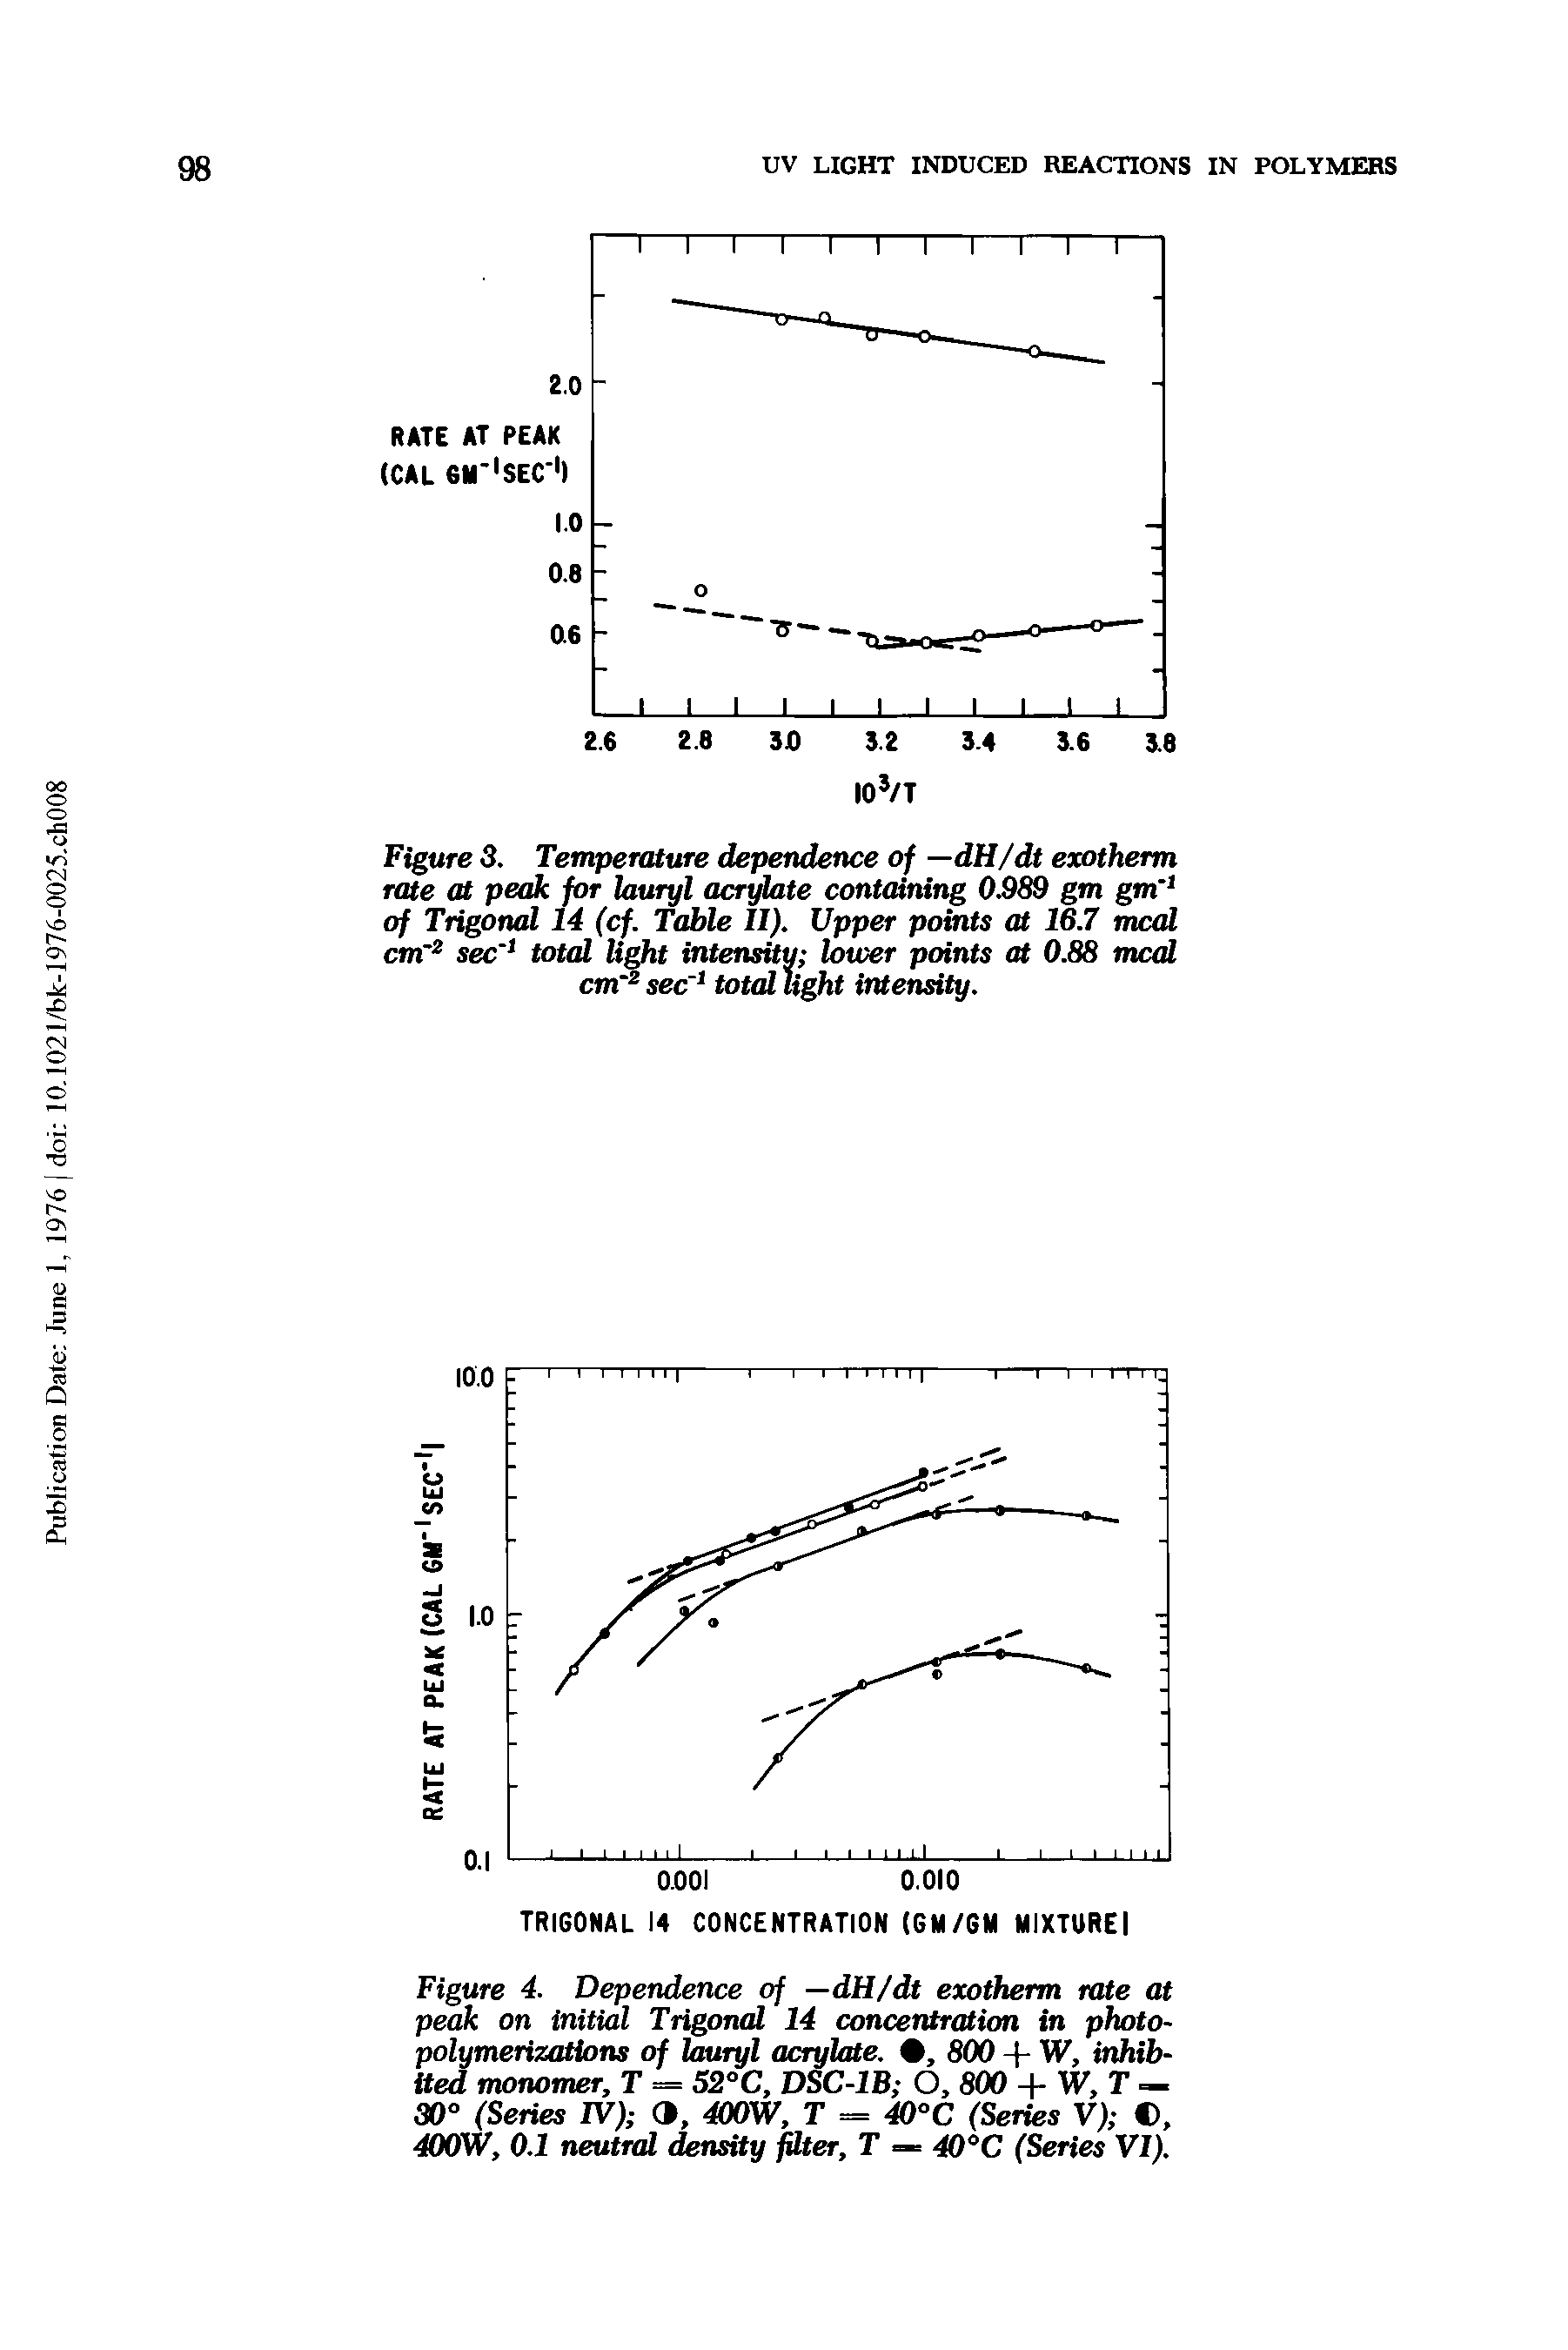 Figure 3. Temperature dependence of —dH/dt exotherm rate at peak for lauryl acrylate containing 0.989 gm gm of Trigonal 14 (cf. Table II). Upper points at 16.7 meal cm sec total light intensitu lower points at 0.88 meal cm sec total light intensity.